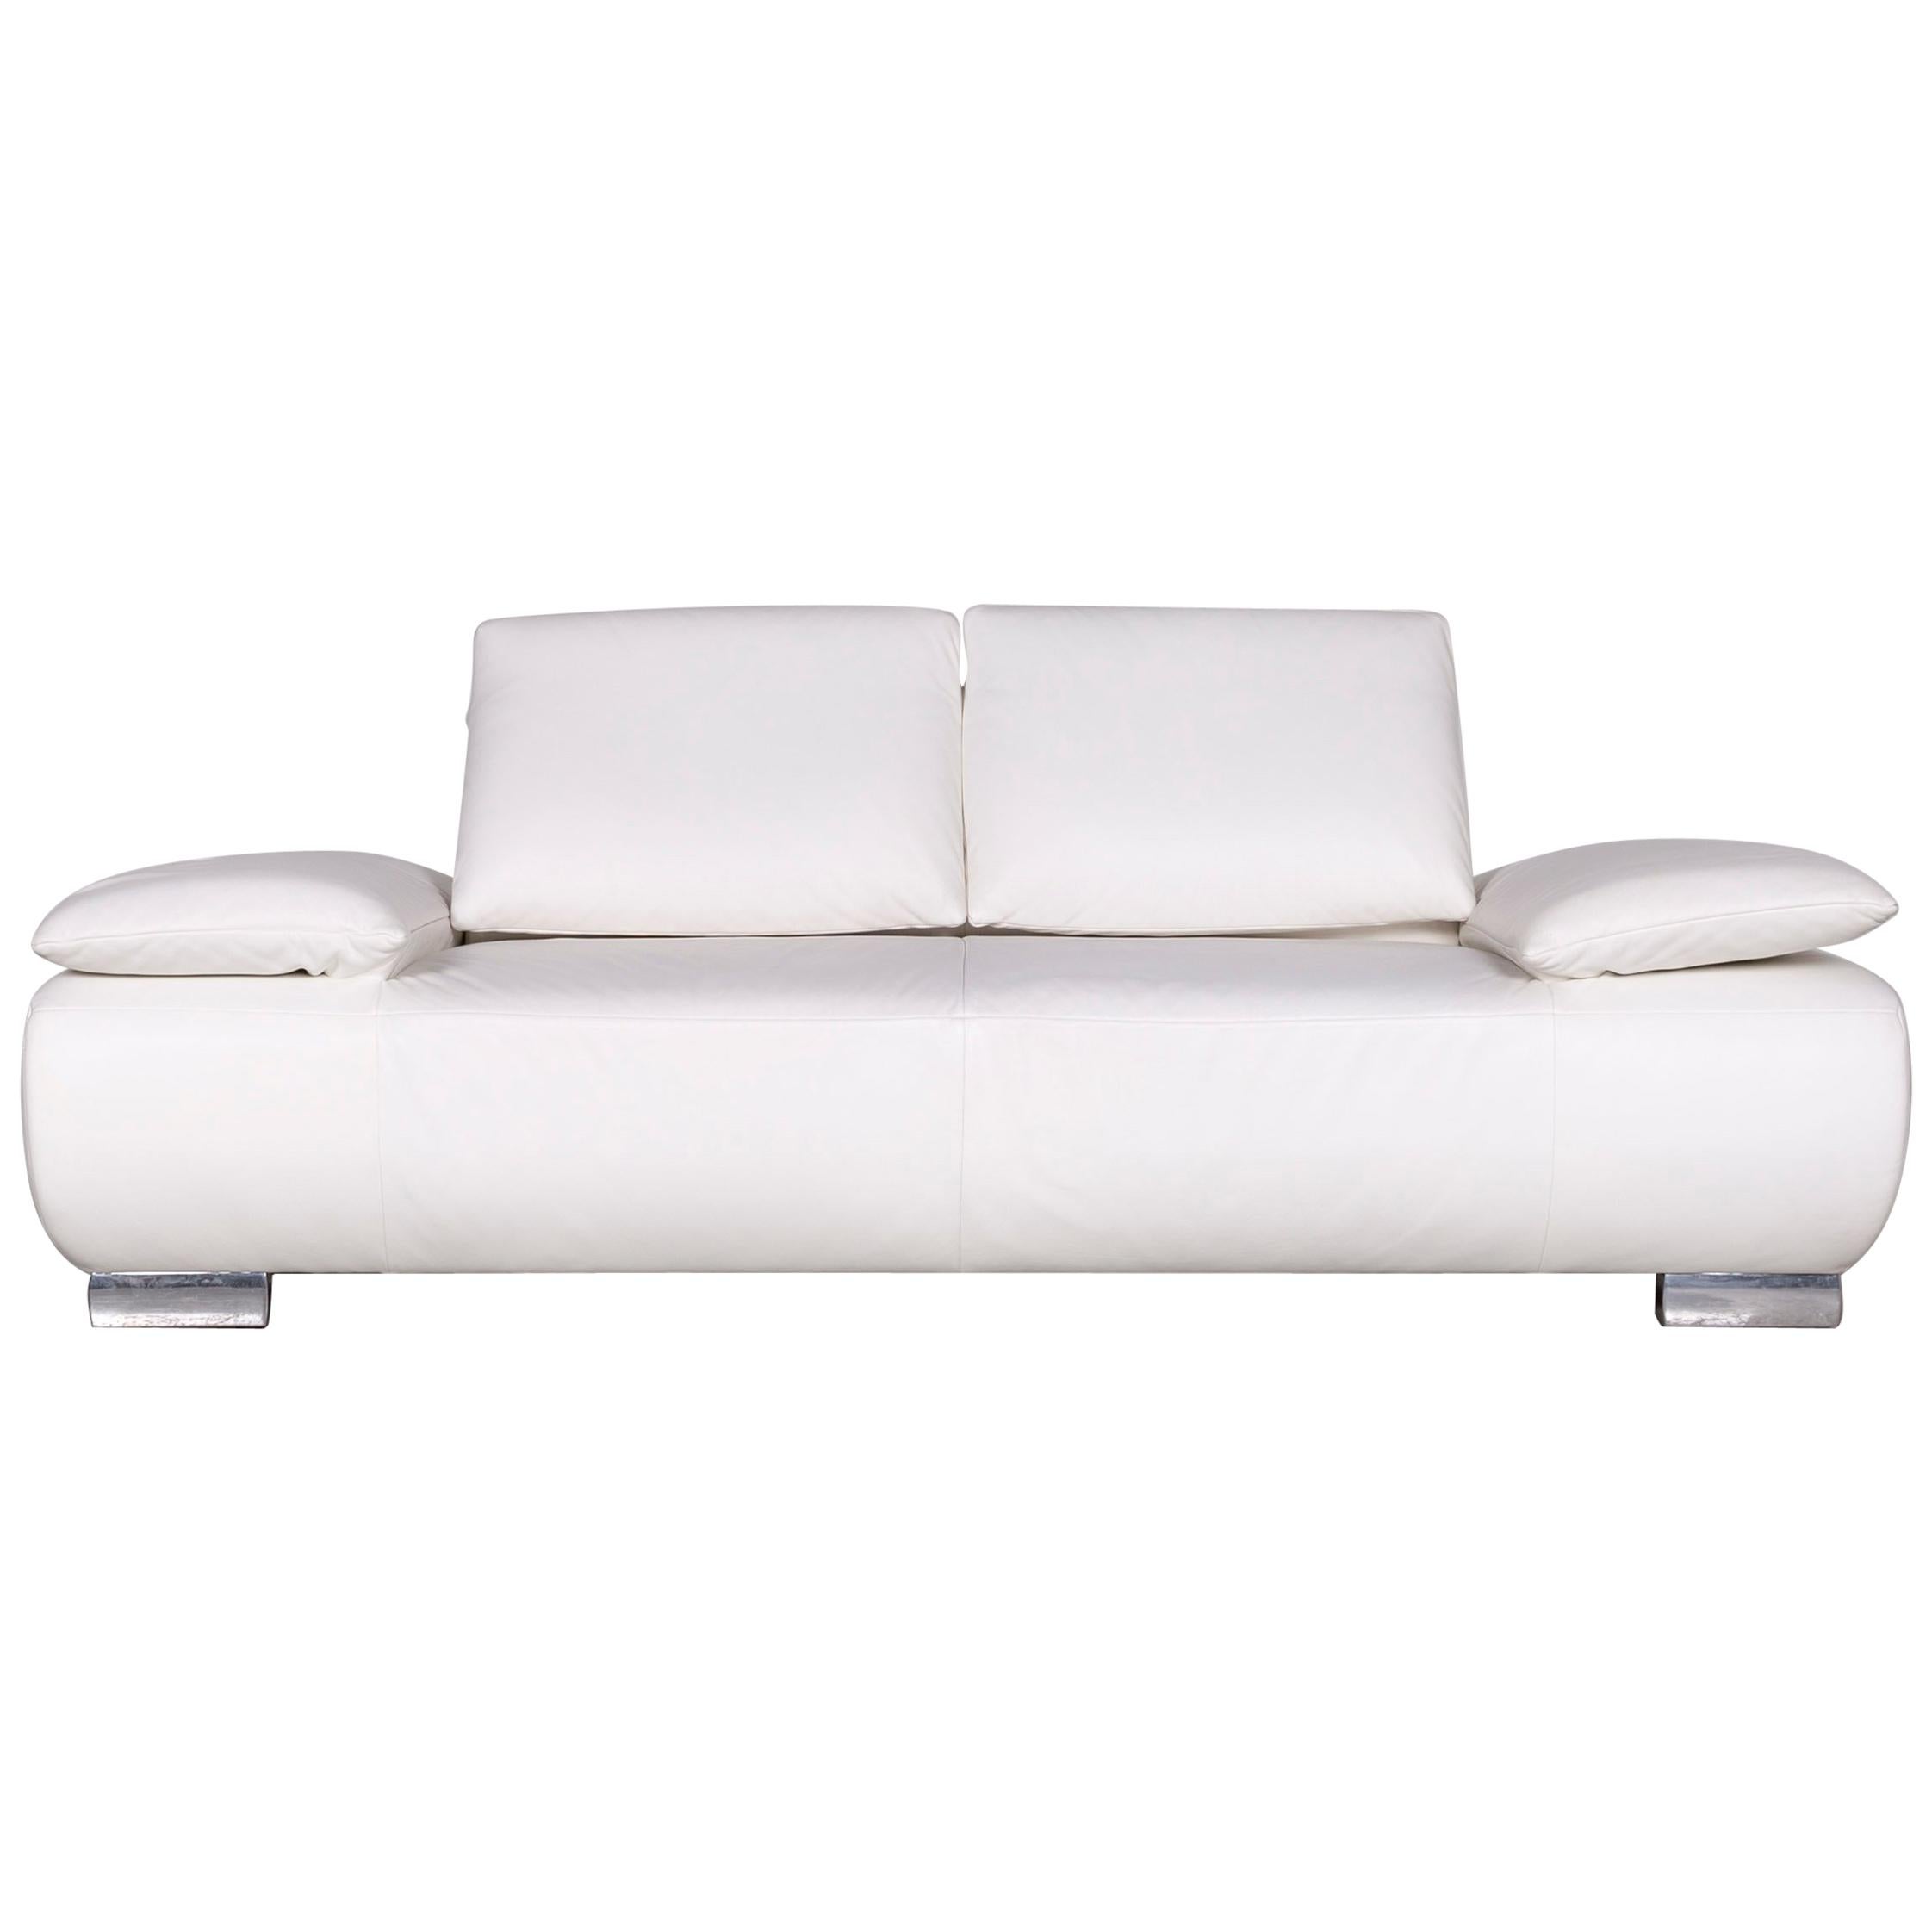 Koinor Volare Designer Leather Sofa White Two-Seat Couch For Sale